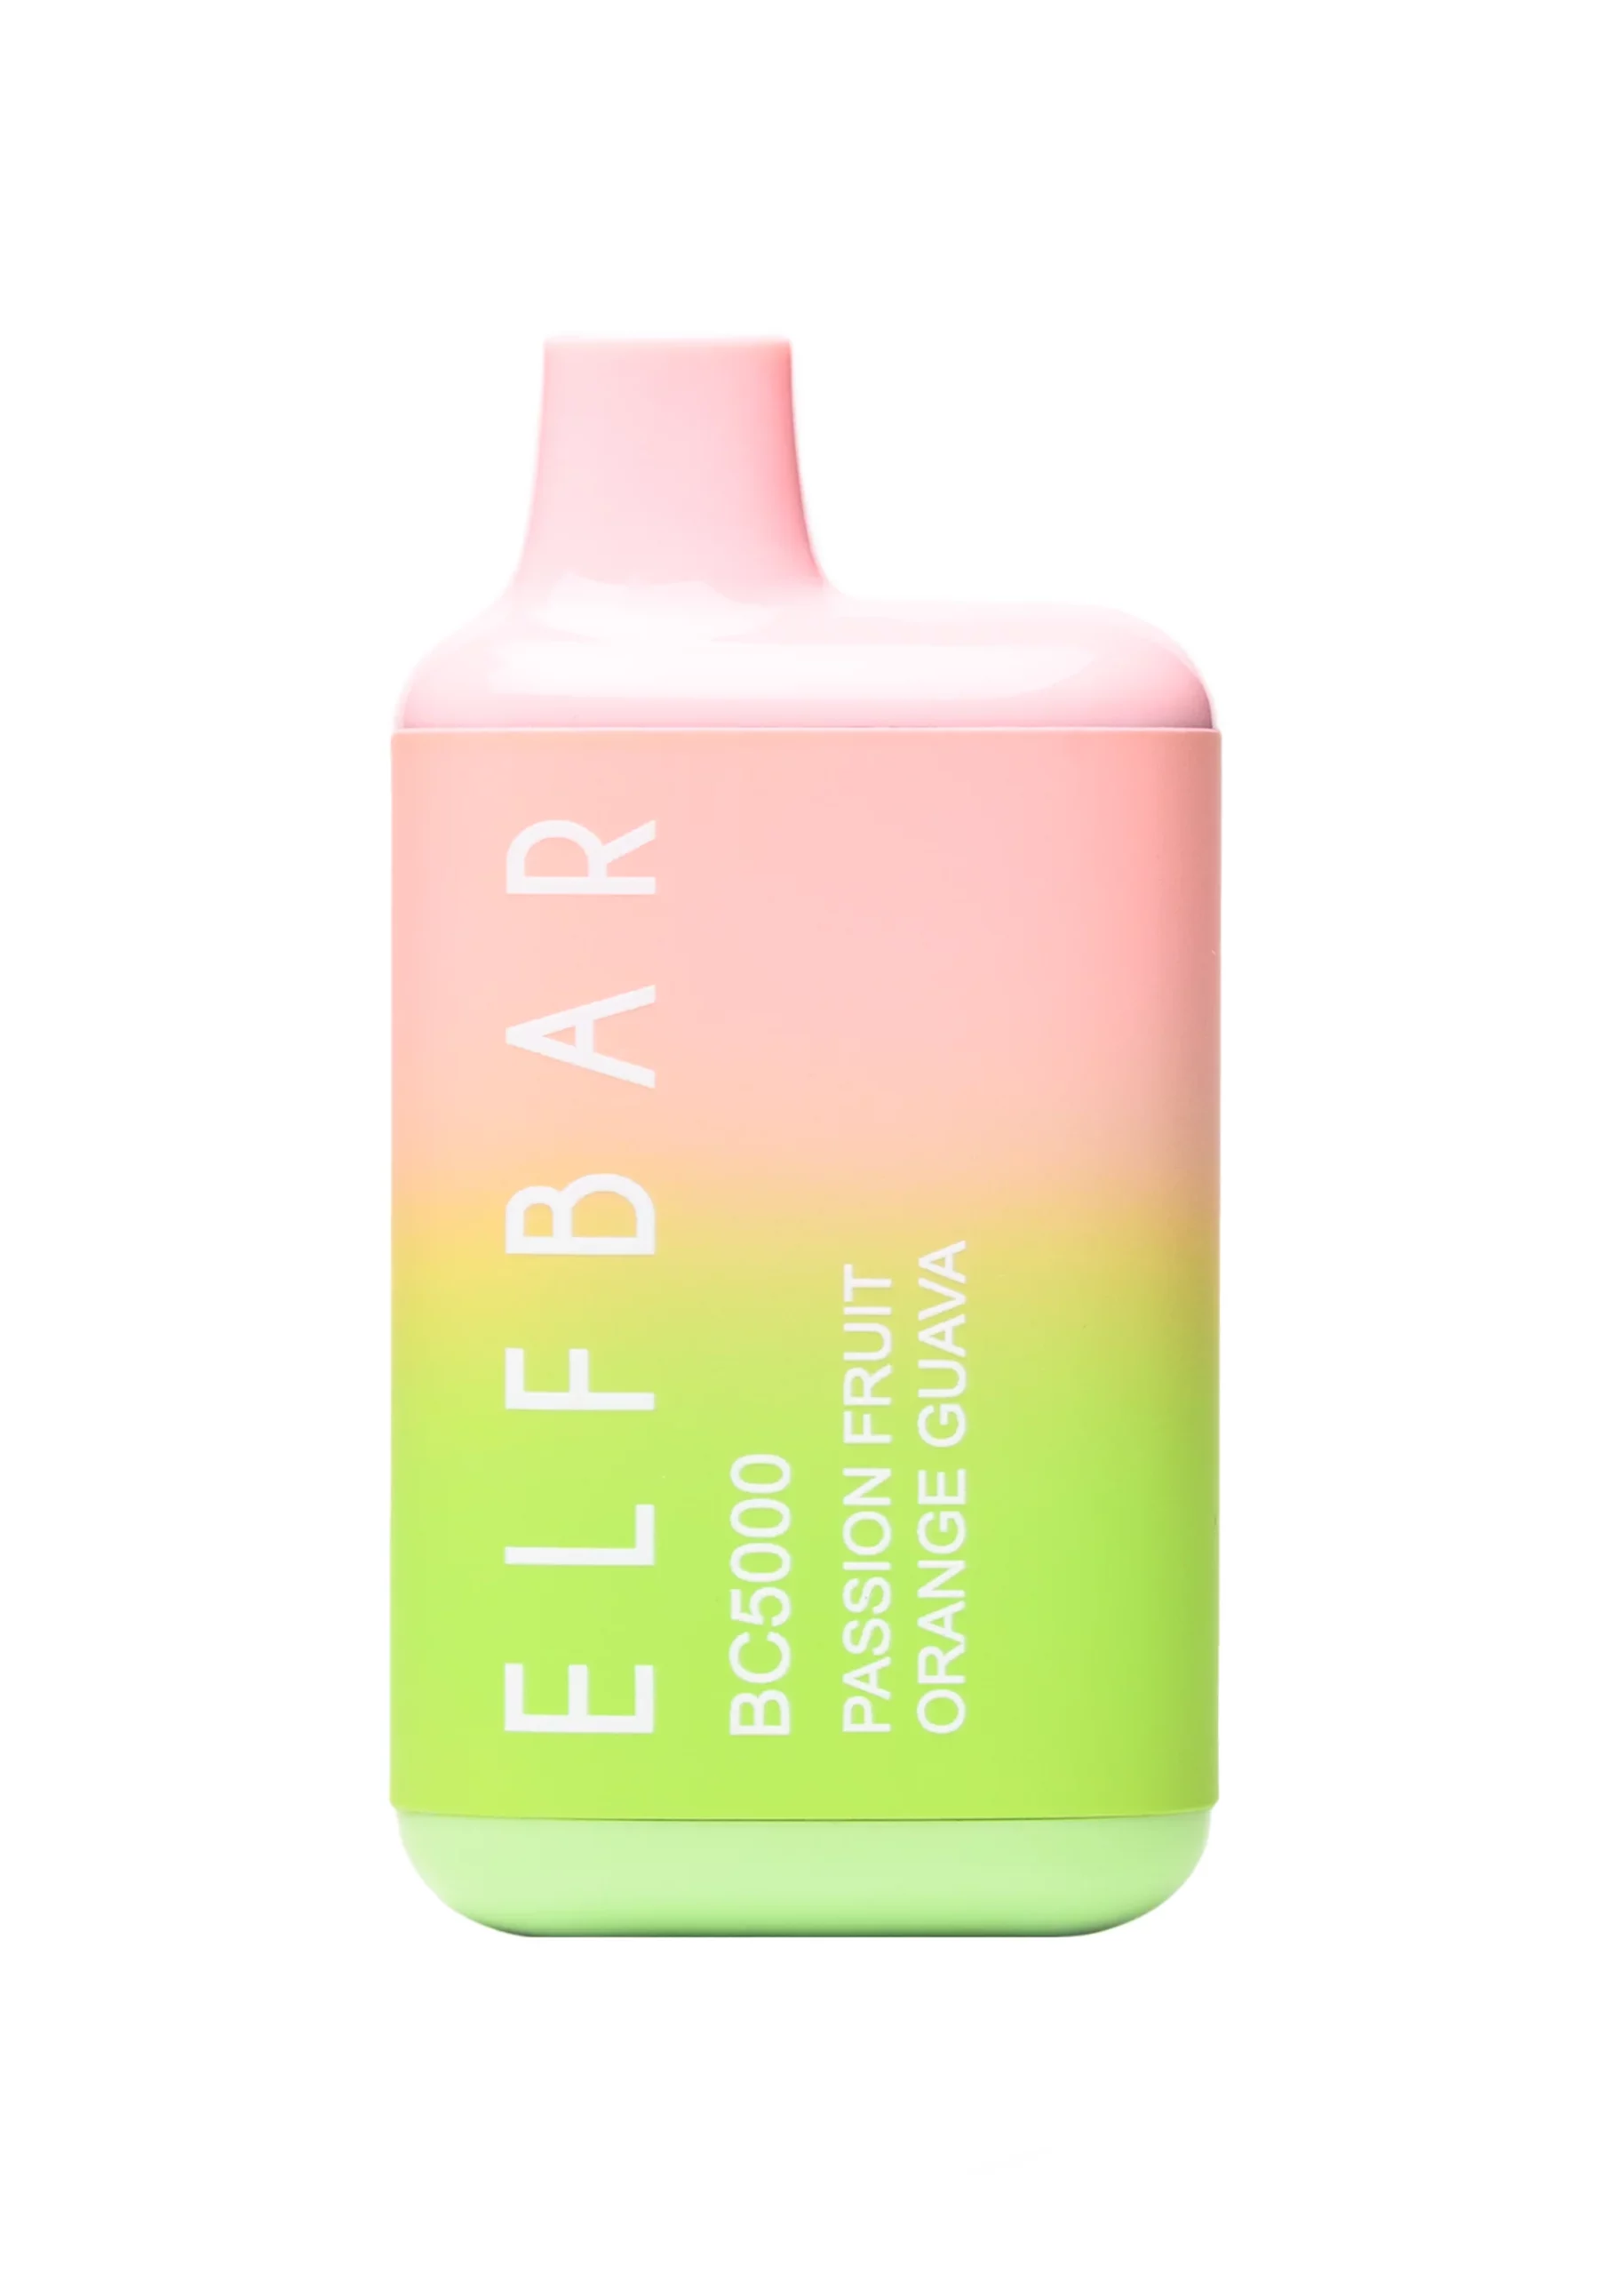 Discover the Extraordinary: Elf Bar BC5000’s Passionate Trio of Flavors